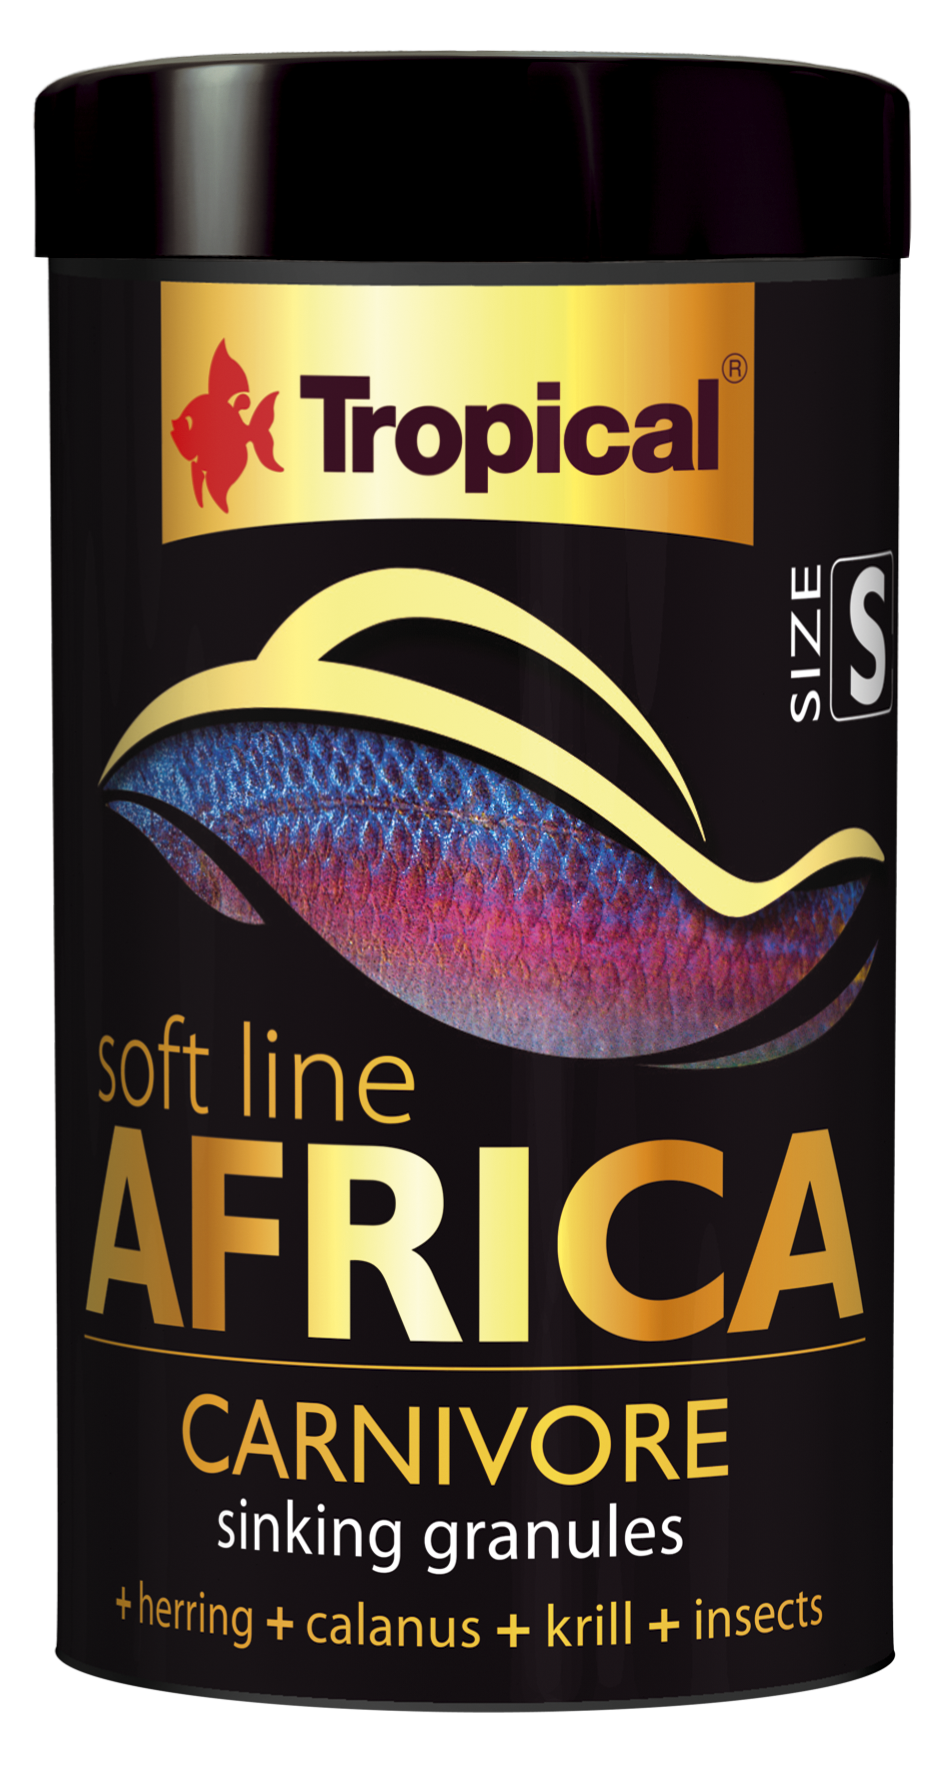 Tropical Soft Africa Carnivore S